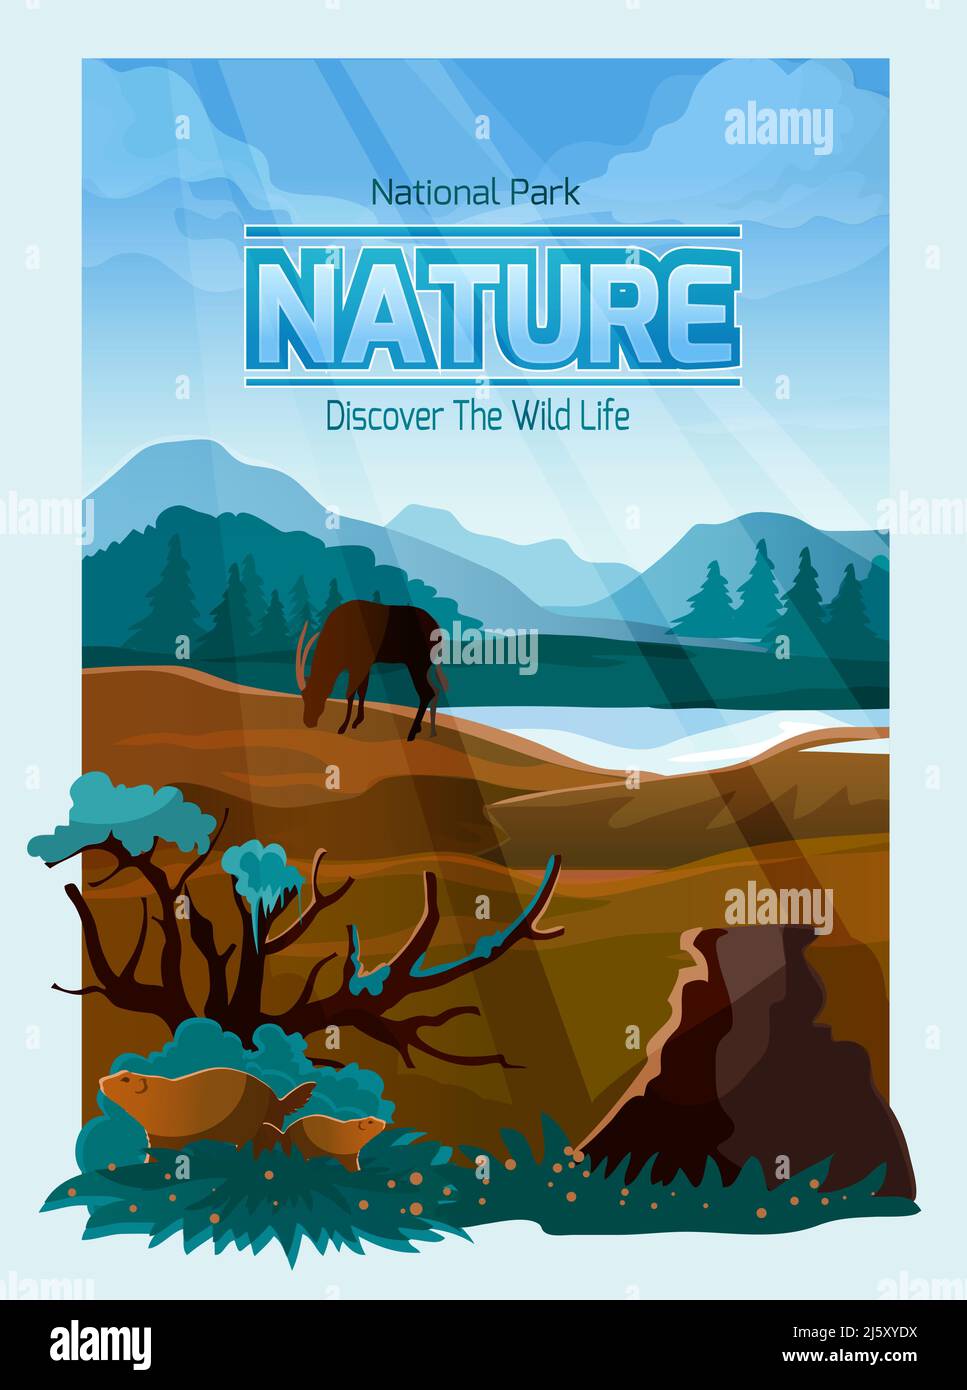 National park wild life decorative banner with mountains range background plants and animals abstract vector illustration Stock Vector